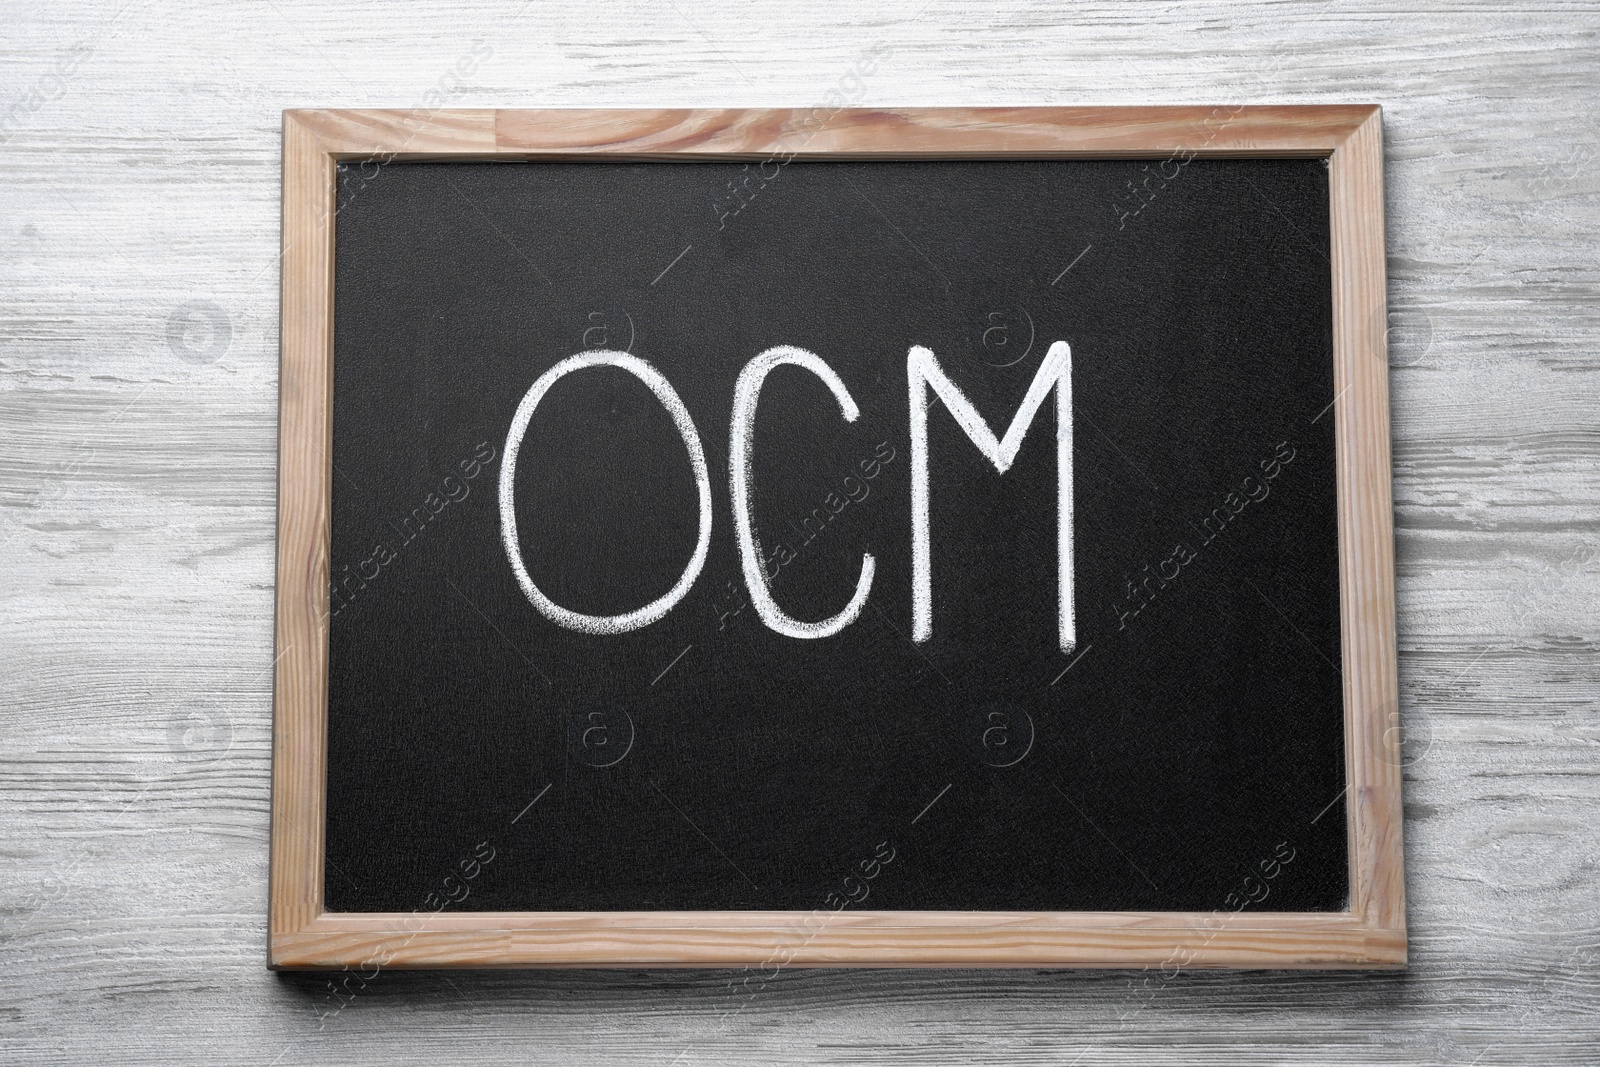 Photo of Small blackboard with abbreviation OCM (Organizational Change Management) on white wooden background, top view